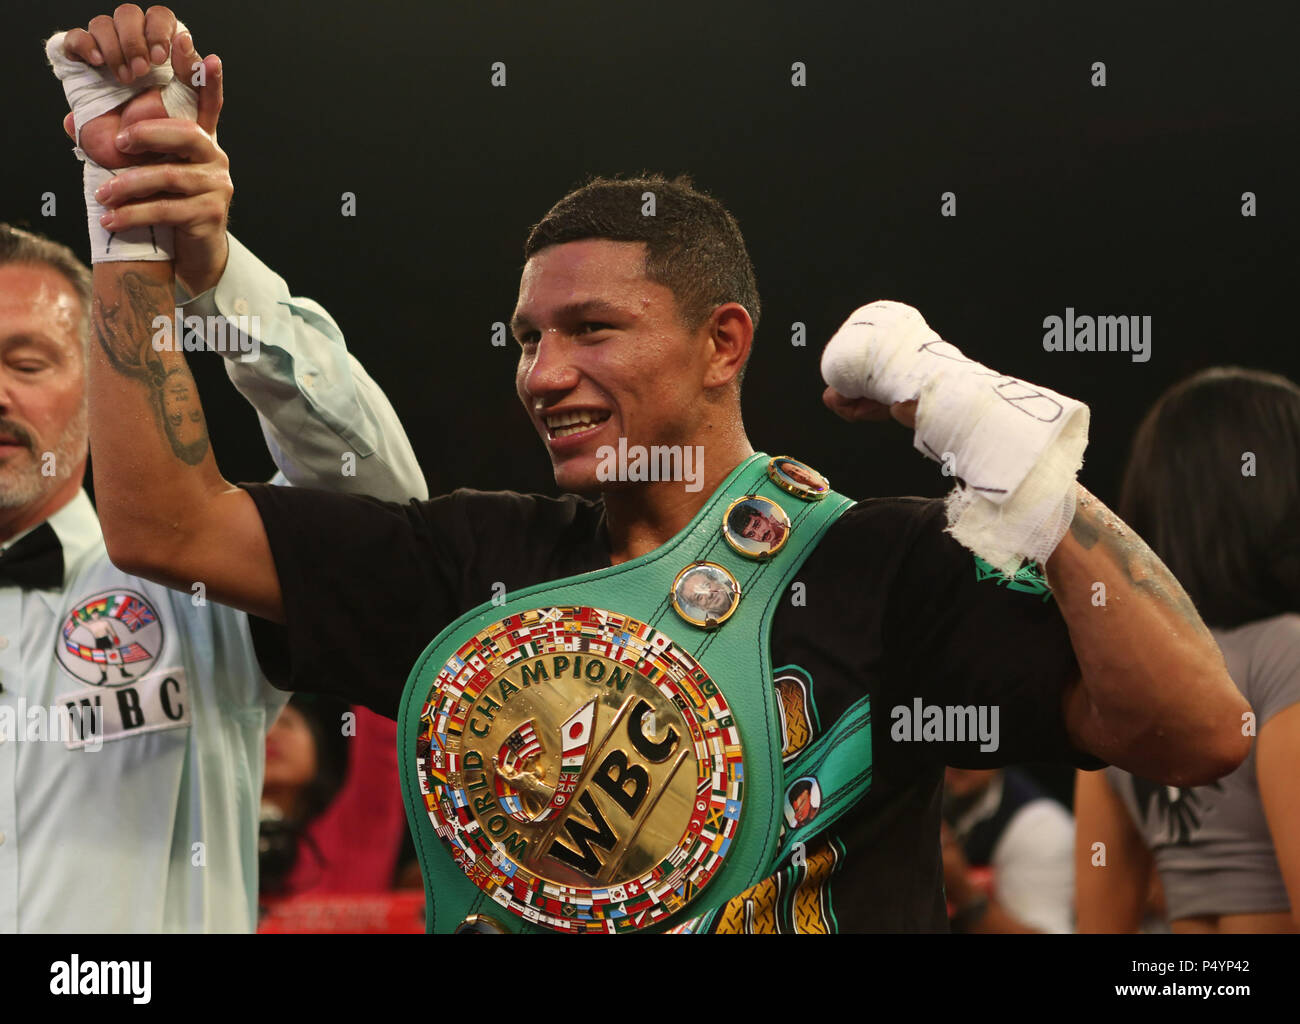 The Mexican Miguel "Alacrán" Berchelt defeats the Argentine Jonathan "Yoni"  Barros during the dispute of the super featherweight title of the World  Boxing Council (WBC), in the city of Merida, Yucatan, Mexico,